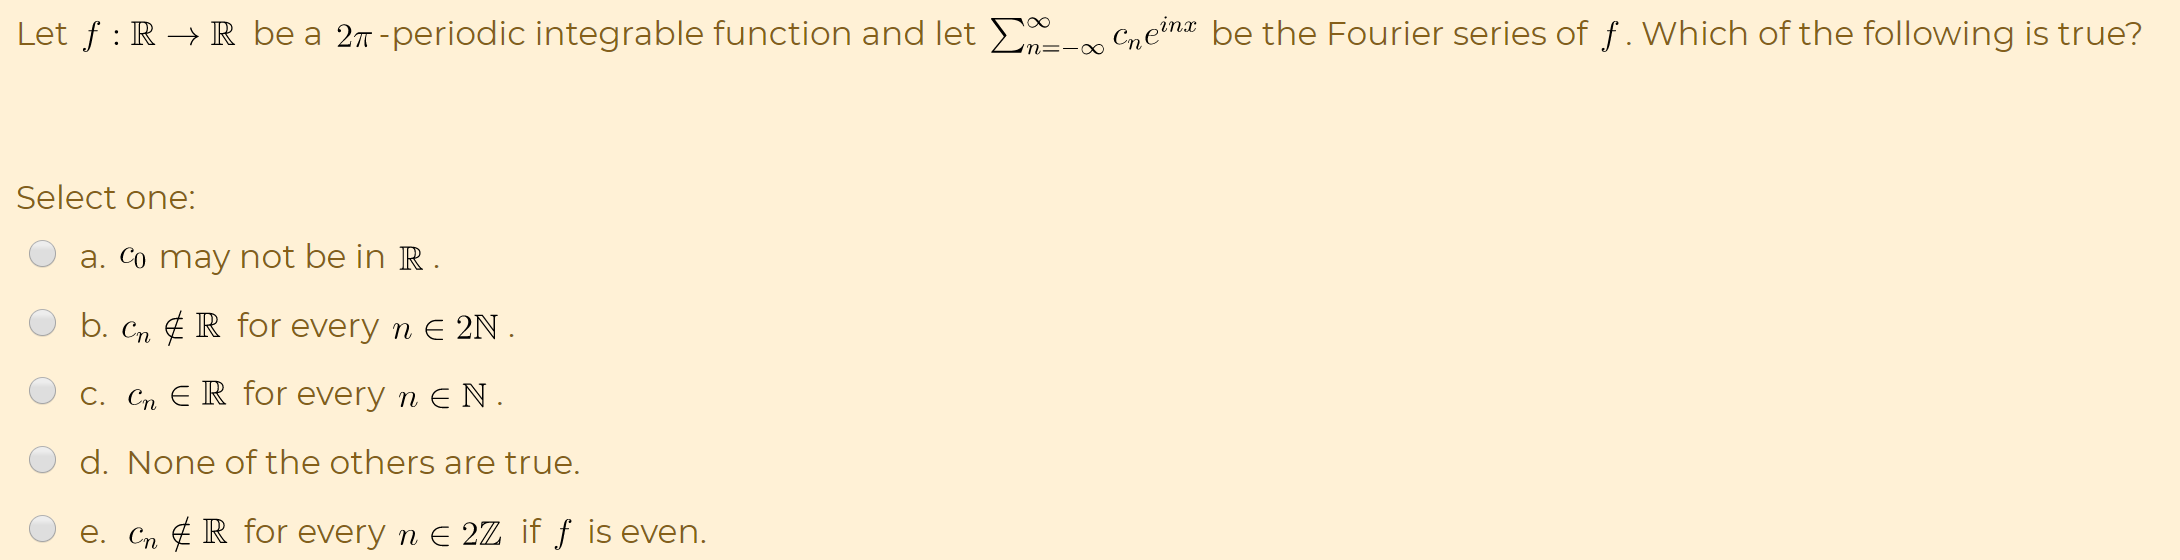 Let f : R → R be a 27 -periodic integrable function and let E- Cneina be the Fourier series of f . Which of the following is true?
n=-xO
Select one:
a. Co may not be in R .
b. Cn ¢ R for every n E 2N .
C. Cn E R for every n E N.
d. None of the others are true.
e. Cn ¢ R for every n E 2Z if ƒ is even.
